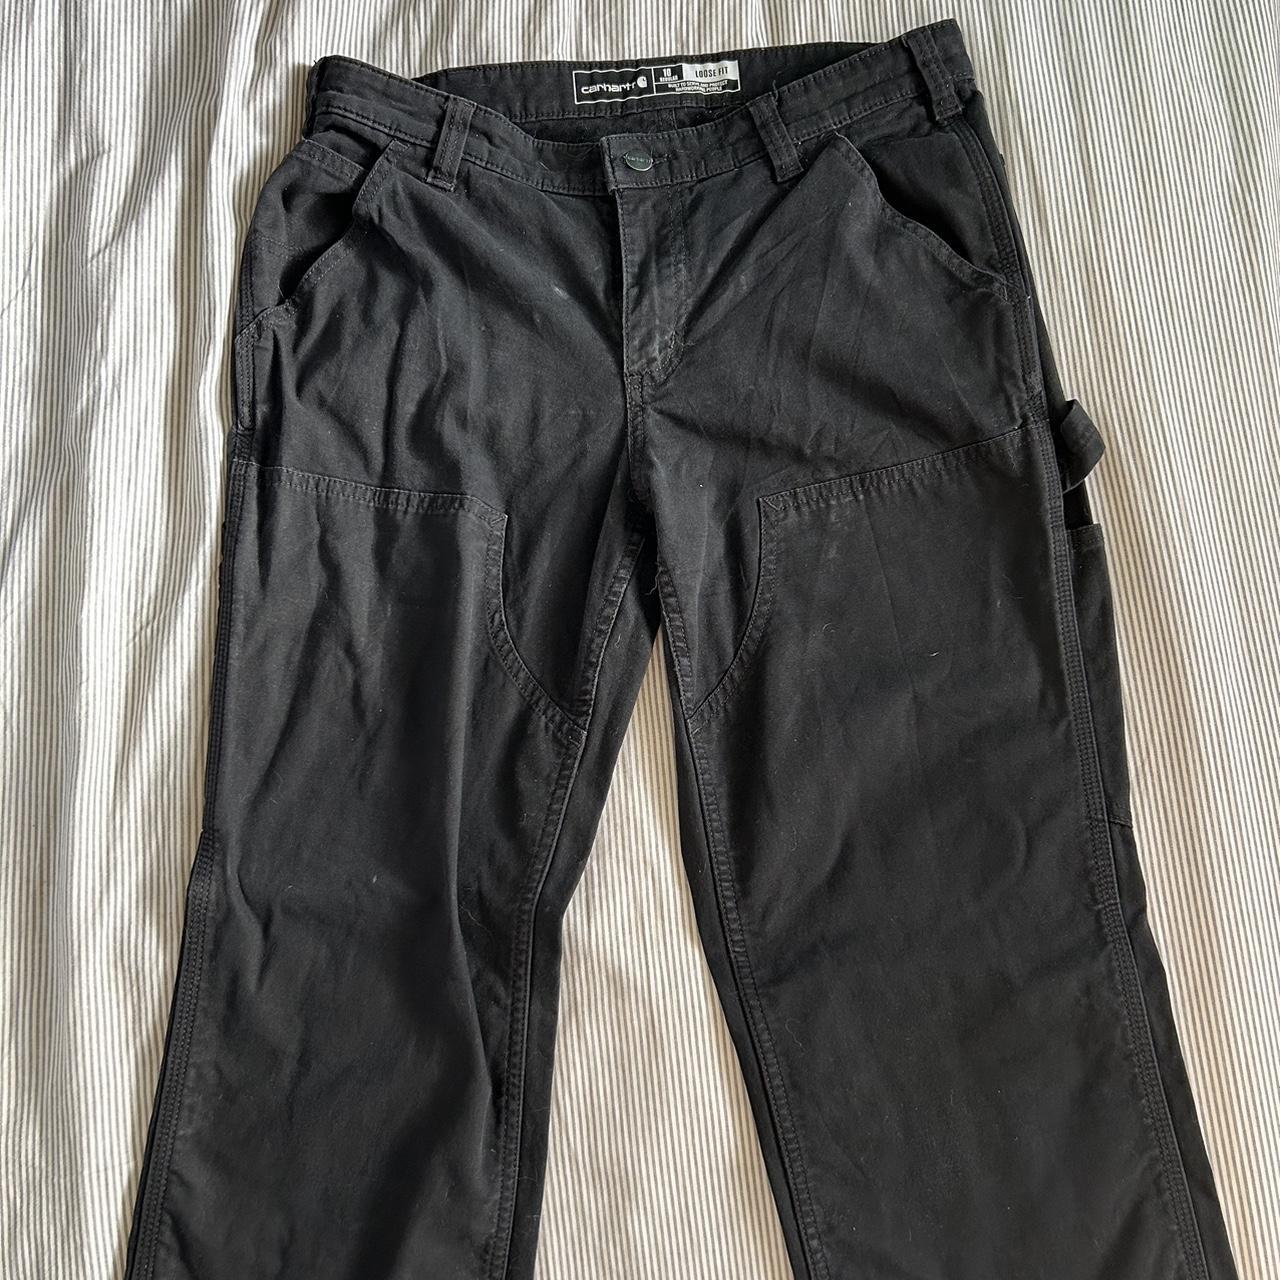 Size 10 Carhartt Work Pants. Wore these a few times, - Depop